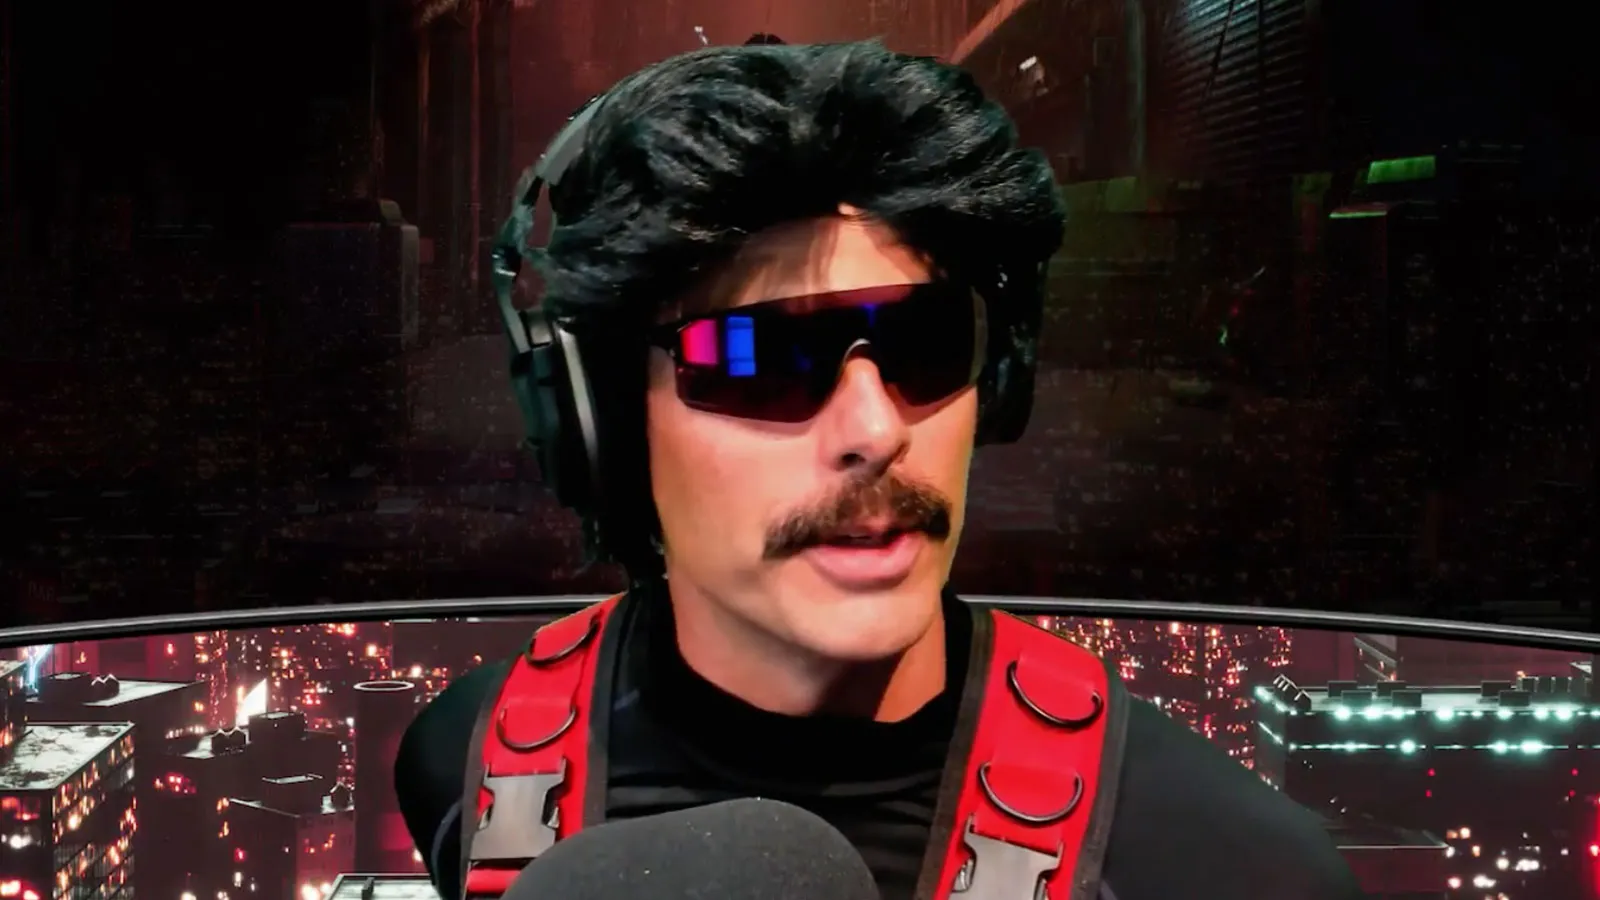 Read more about the article Dr Disrespect’s studio cuts ties as he announces indefinite break from streaming amid allegations